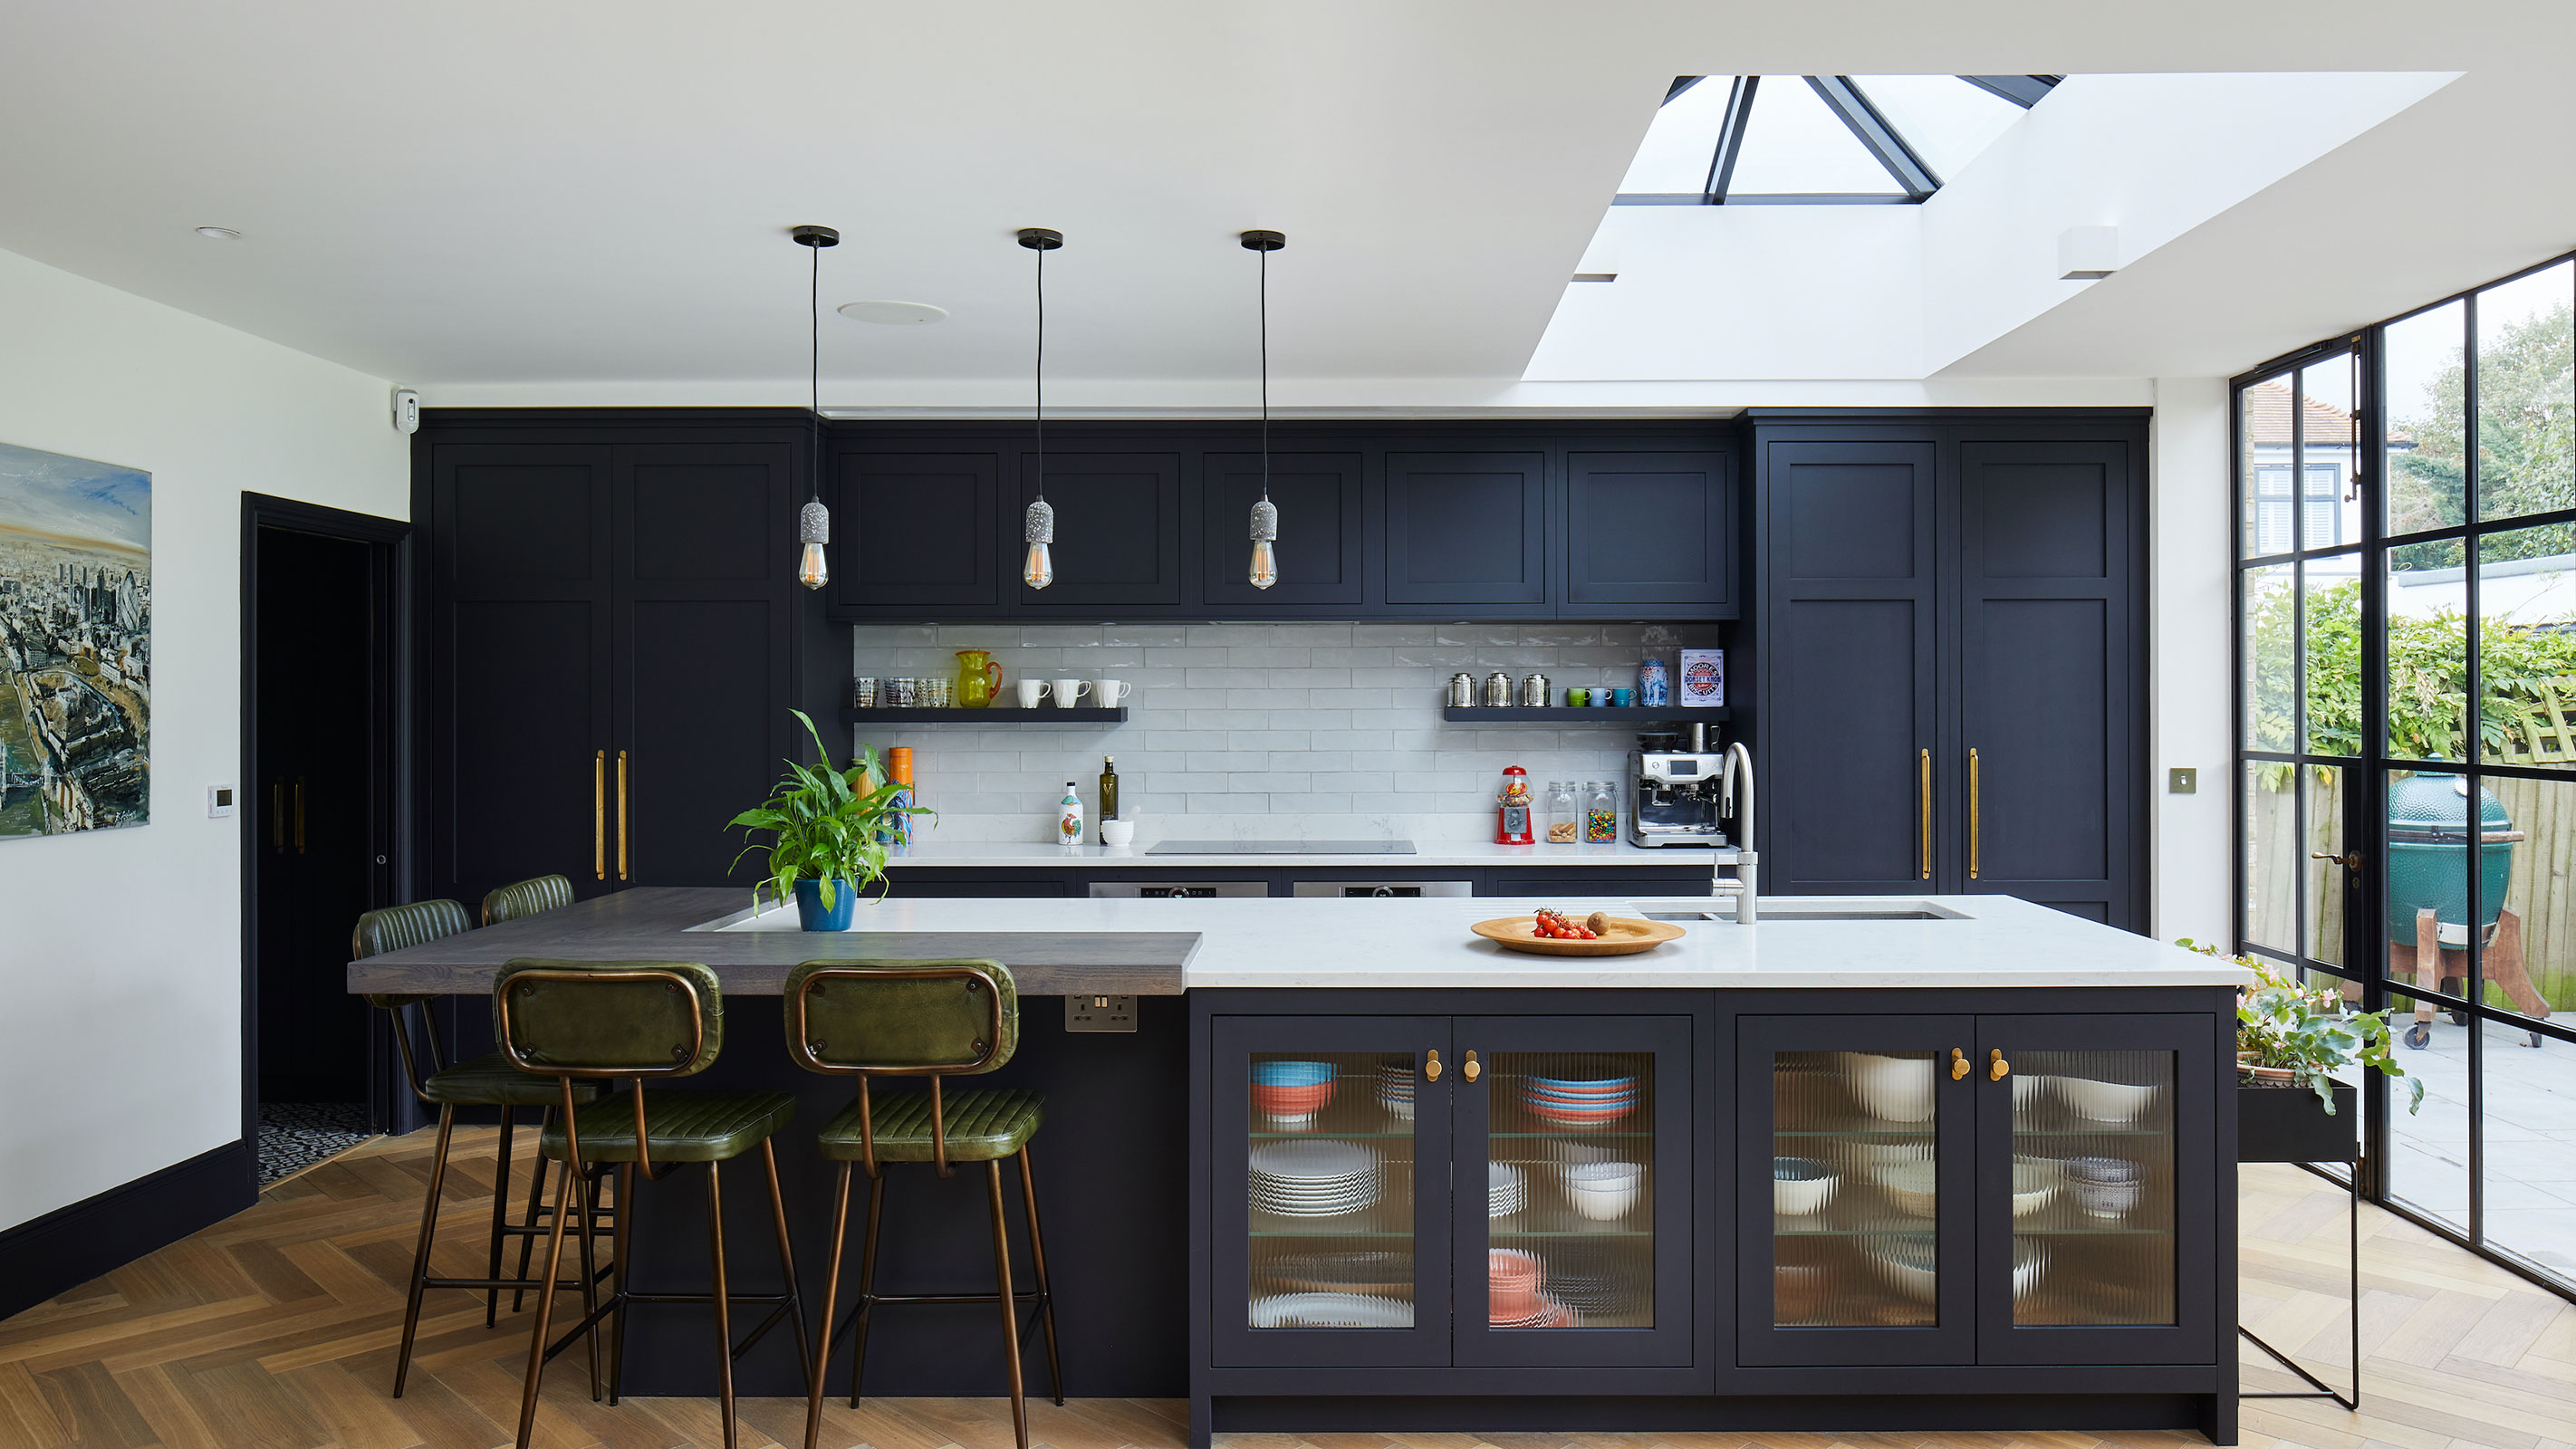 Lighting a kitchen island: Bright ideas on how to do it well | Homebuilding